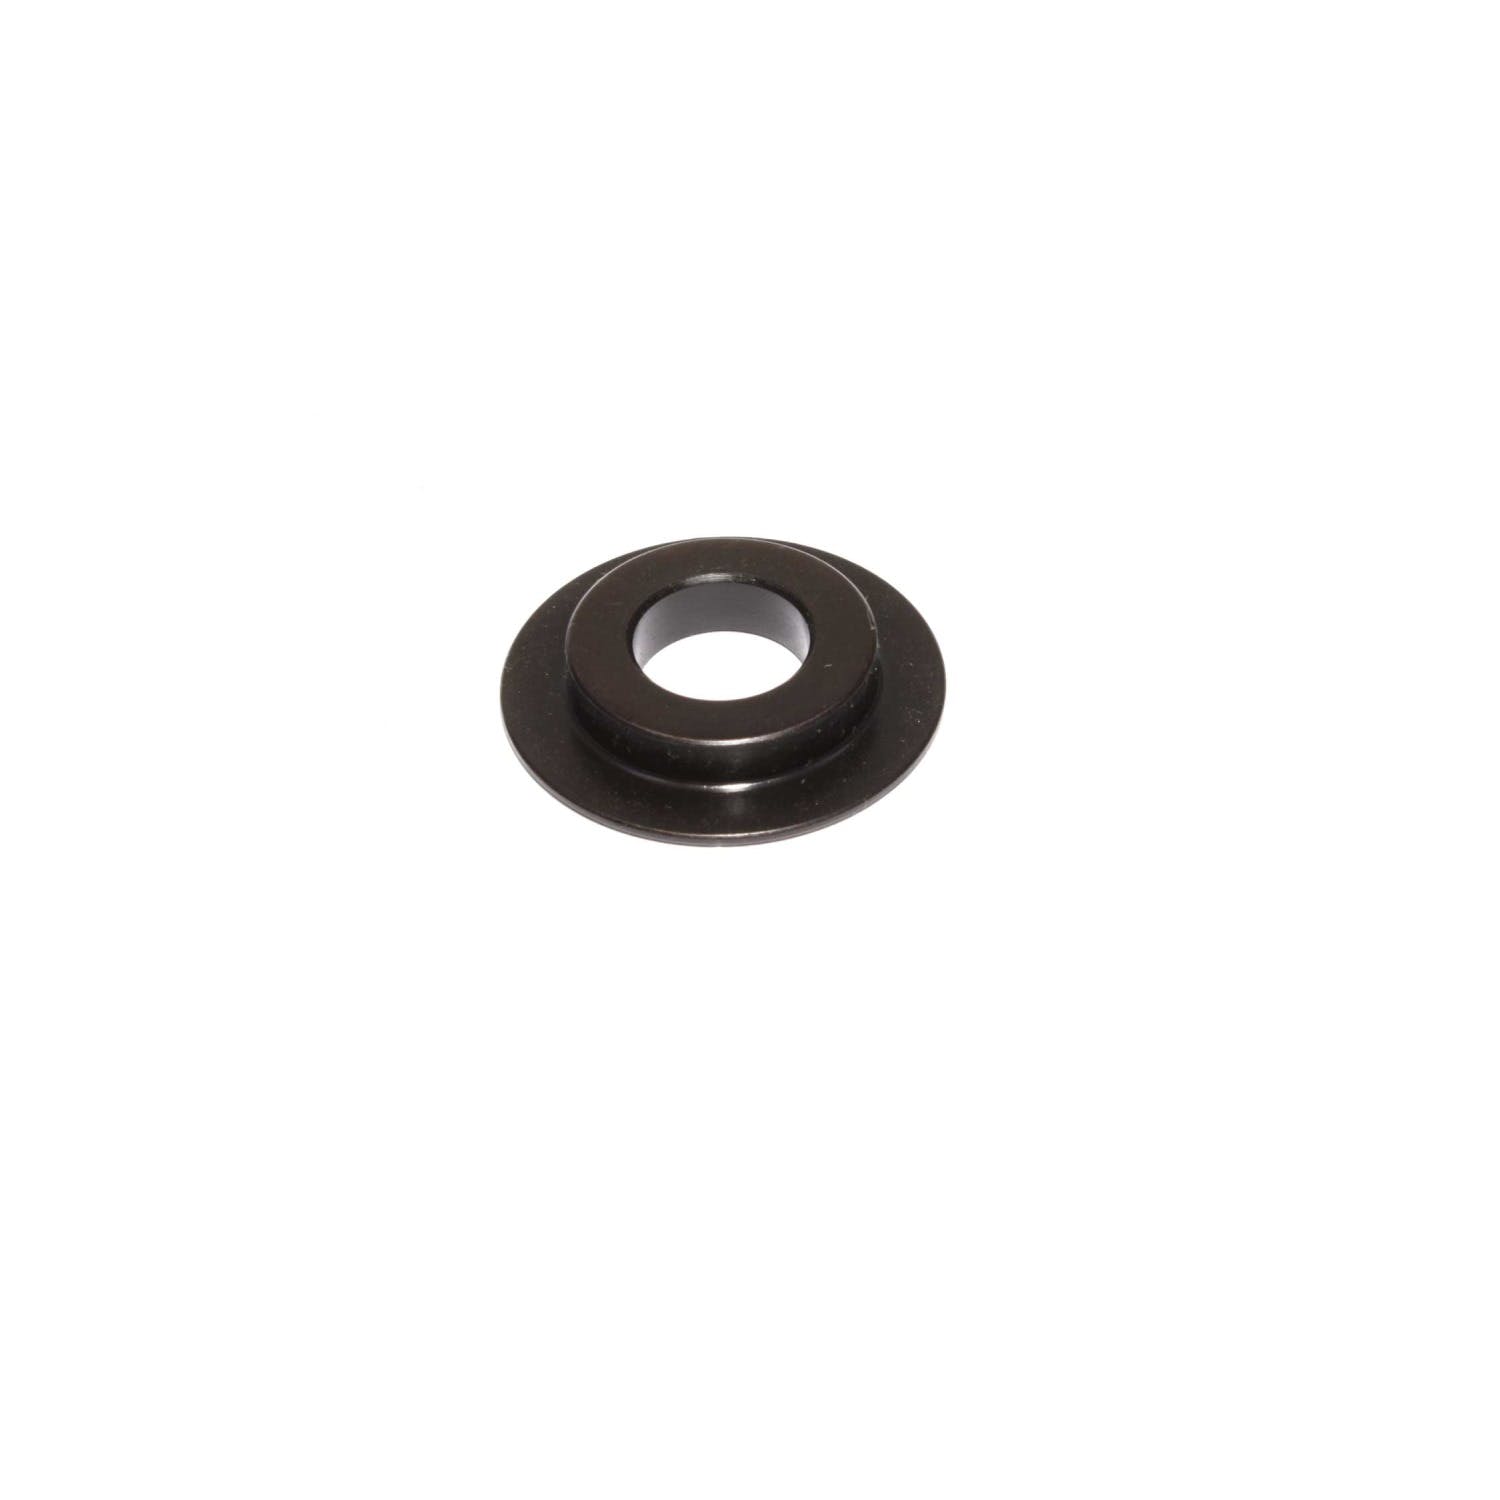 Competition Cams 4685-1 ID Spring Locator - 1.285 inch OD, .532 inch ID, .040 inch Thickness